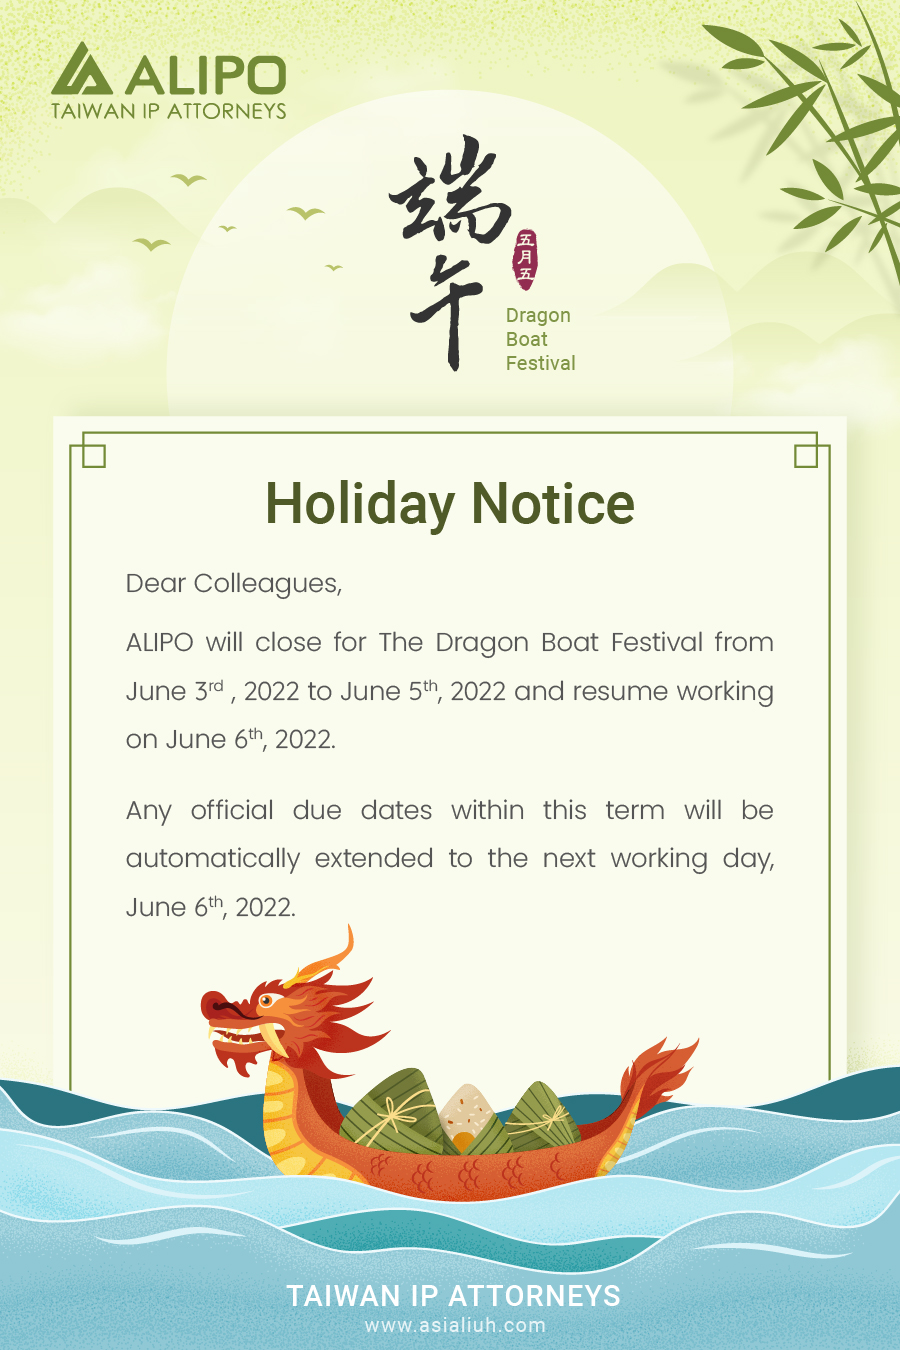 Dear Colleagues,  ALIPO will close for The Dragon Boat Festival from June 3rd , 2022 to June 5th, 2022 and resume working on June 6th, 2022.